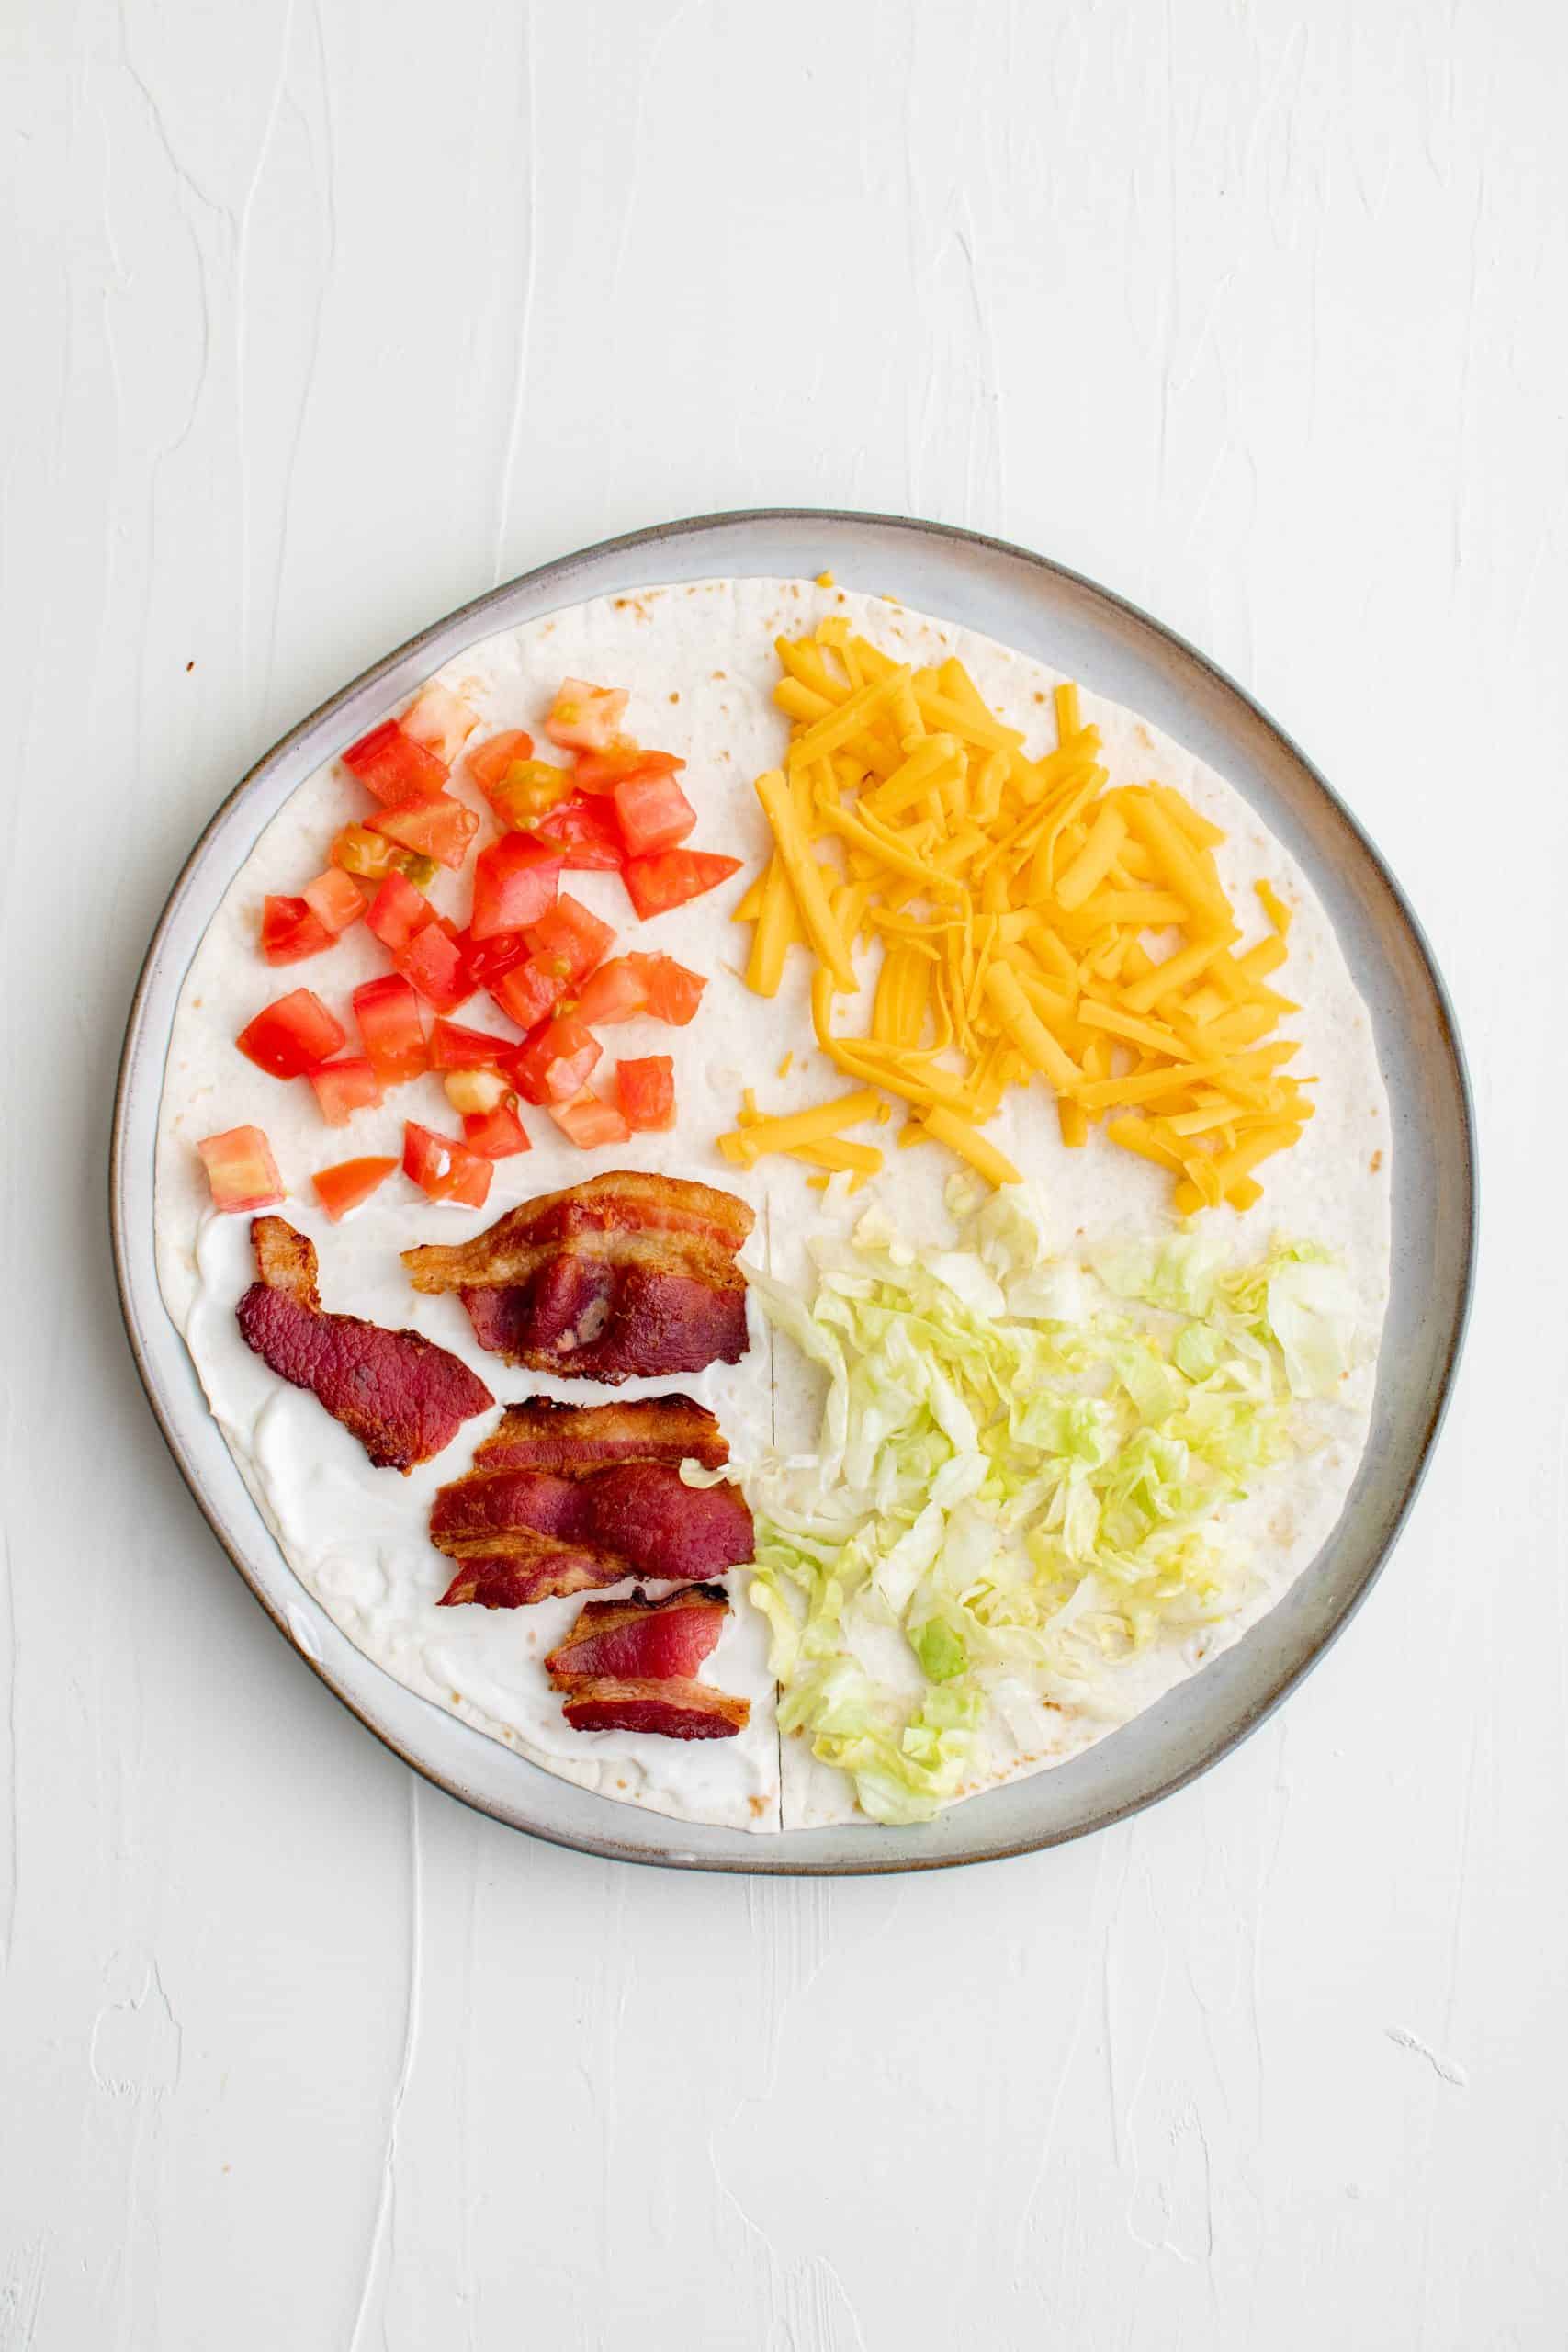 Bacon, tomatoes, cheese and lettuce on top of separate four sections of a flour tortilla.